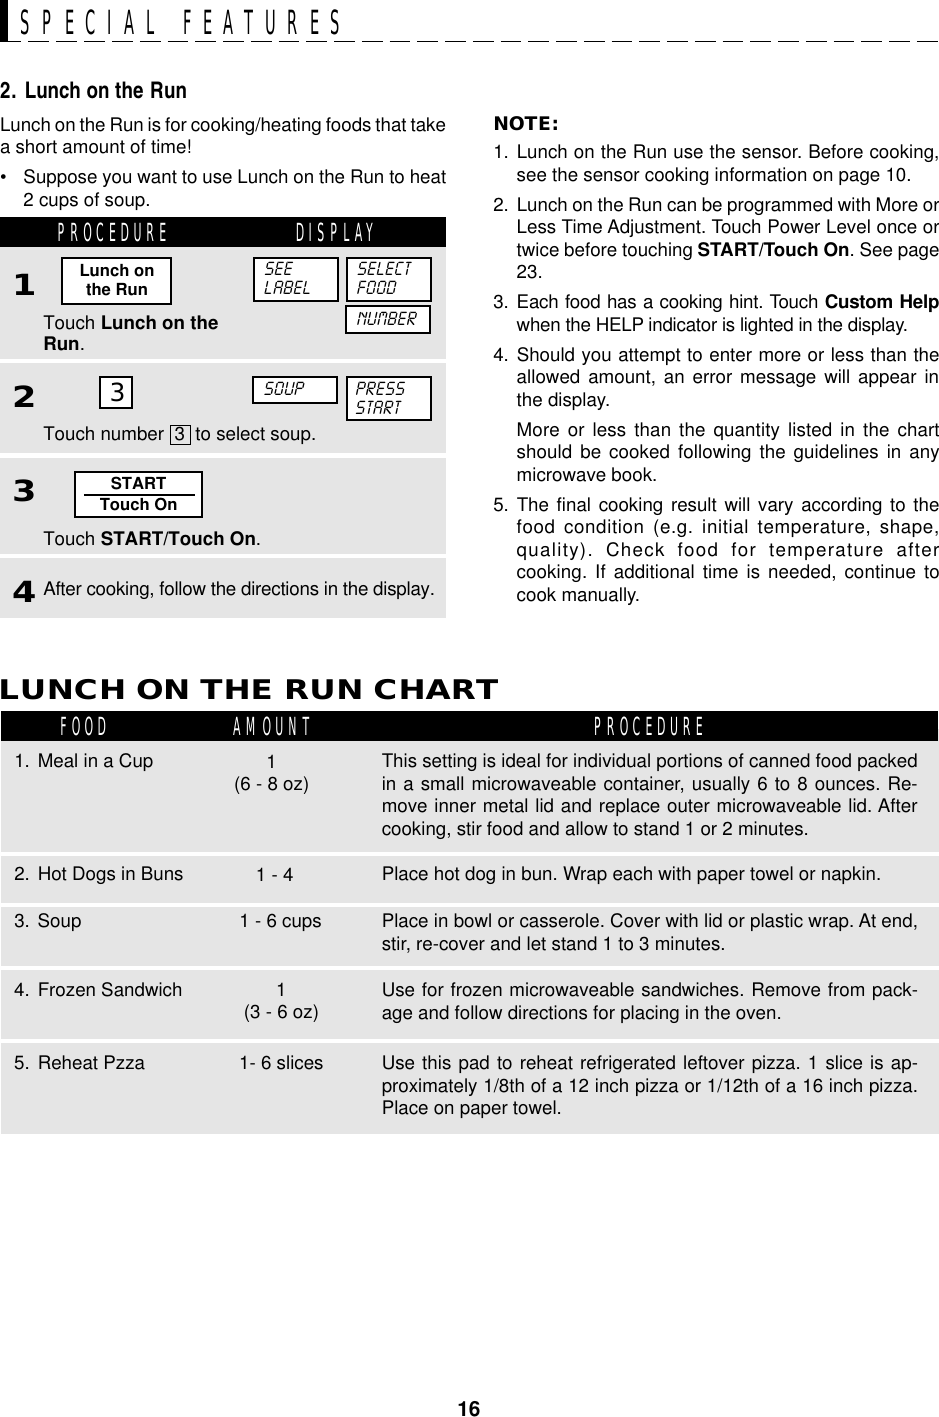 16STARTTouch On3SPECIAL FEATURESLunch on the Run is for cooking/heating foods that takea short amount of time!• Suppose you want to use Lunch on the Run to heat2 cups of soup.2. Lunch on the RunPROCEDURE DISPLAY1Touch Lunch on theRun.2NOTE:1. Lunch on the Run use the sensor. Before cooking,see the sensor cooking information on page 10.2. Lunch on the Run can be programmed with More orLess Time Adjustment. Touch Power Level once ortwice before touching START/Touch On. See page23.3. Each food has a cooking hint. Touch Custom Helpwhen the HELP indicator is lighted in the display.4. Should you attempt to enter more or less than theallowed amount, an error message will appear inthe display.More or less than the quantity listed in the chartshould be cooked following the guidelines in anymicrowave book.5. The final cooking result will vary according to thefood condition (e.g. initial temperature, shape,quality). Check food for temperature aftercooking. If additional time is needed, continue tocook manually.SOUP PRESSSTARTSEELABELSELECTFOODLunch onthe RunNUMBER3Touch START/Touch On.4After cooking, follow the directions in the display.Touch number  3  to select soup.LUNCH ON THE RUN CHARTFOOD AMOUNT PROCEDURE1. Meal in a CupPlace hot dog in bun. Wrap each with paper towel or napkin.2. Hot Dogs in BunsPlace in bowl or casserole. Cover with lid or plastic wrap. At end,stir, re-cover and let stand 1 to 3 minutes.3. Soup1 - 41 - 6 cupsThis setting is ideal for individual portions of canned food packedin a small microwaveable container, usually 6 to 8 ounces. Re-move inner metal lid and replace outer microwaveable lid. Aftercooking, stir food and allow to stand 1 or 2 minutes.1(6 - 8 oz)Use for frozen microwaveable sandwiches. Remove from pack-age and follow directions for placing in the oven.4. Frozen Sandwich 1(3 - 6 oz)Use this pad to reheat refrigerated leftover pizza. 1 slice is ap-proximately 1/8th of a 12 inch pizza or 1/12th of a 16 inch pizza.Place on paper towel.5. Reheat Pzza 1- 6 slices